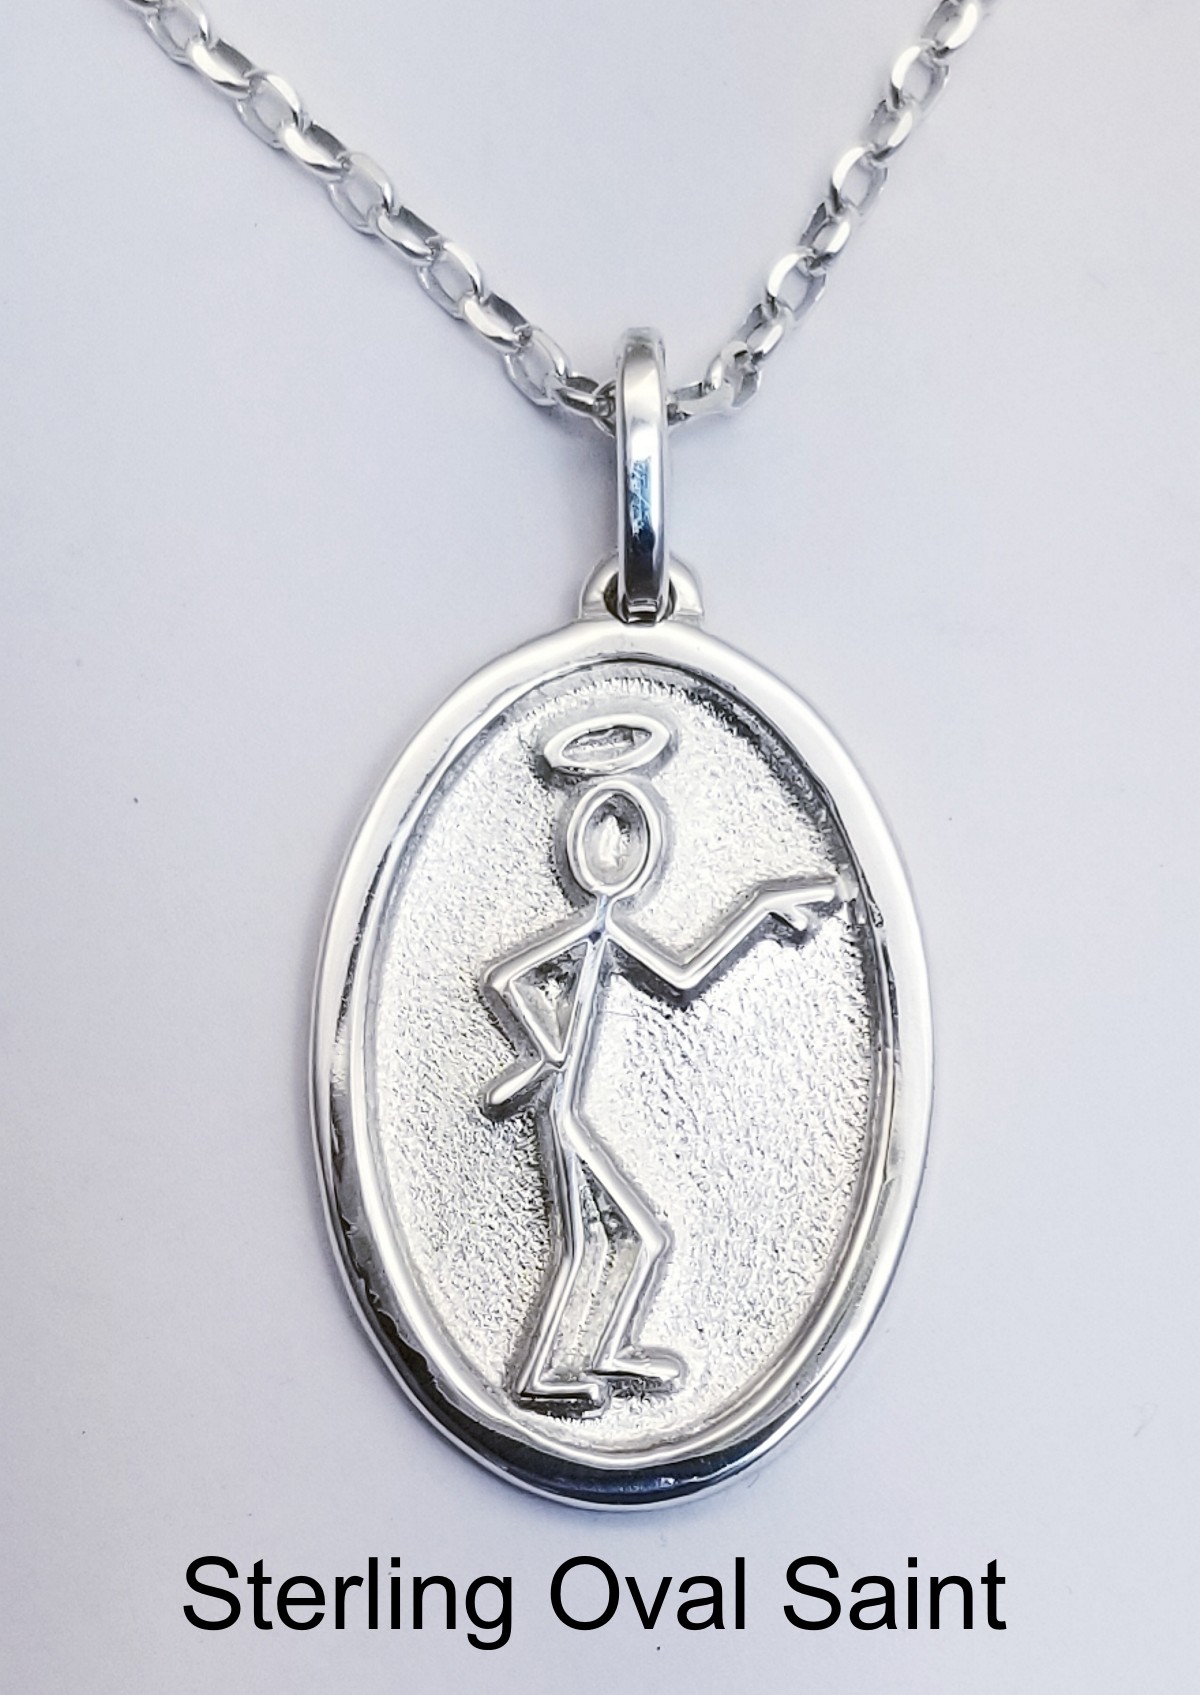 Oval Saint pendant in sterling silver